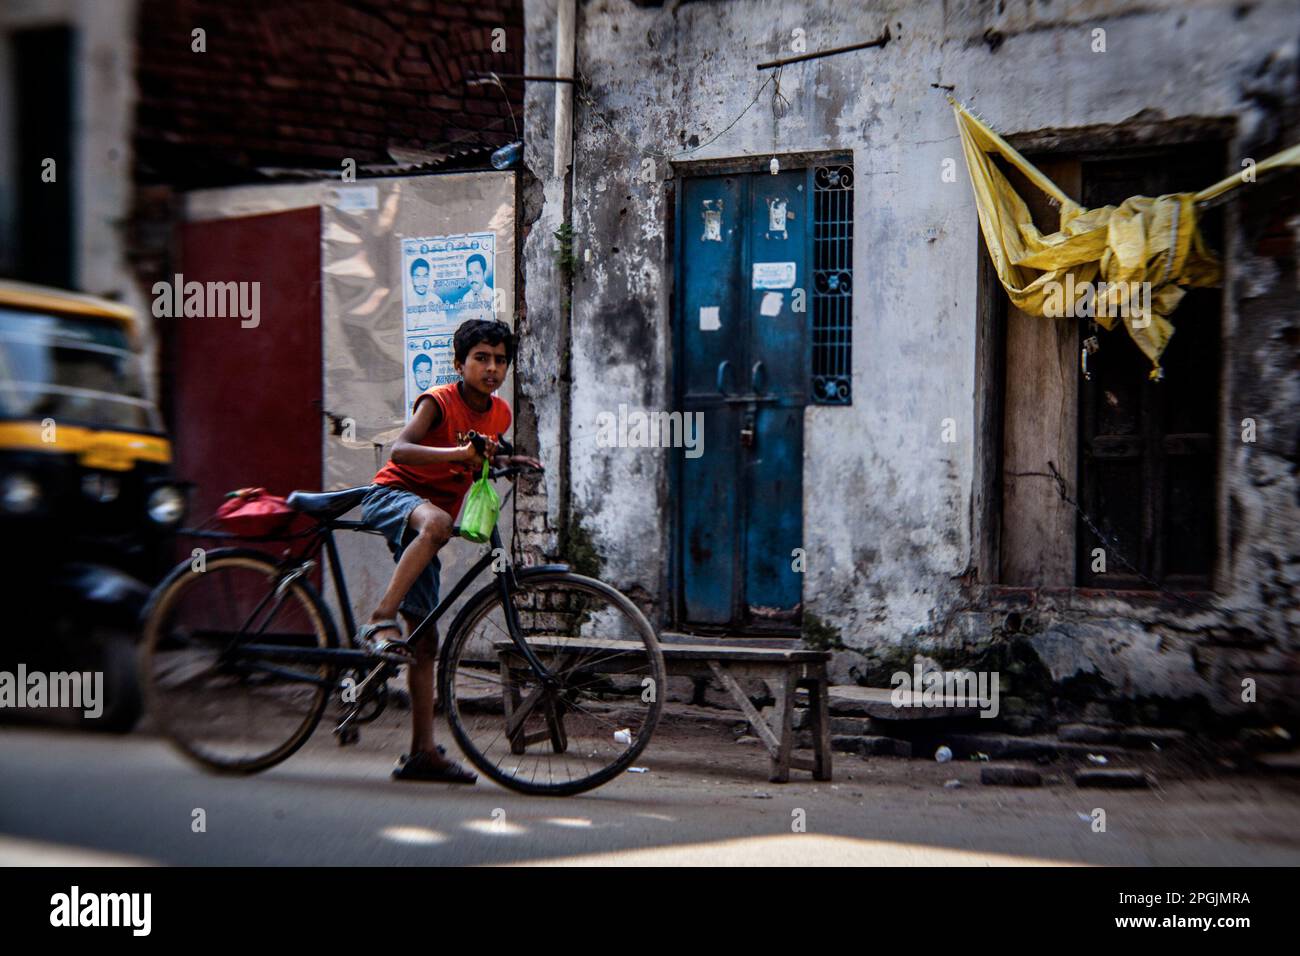 VARANASI, INDIA - OCTOBER 29, 2013: Indian boy stands next to traditional bicycle part in corner of street. Stock Photo